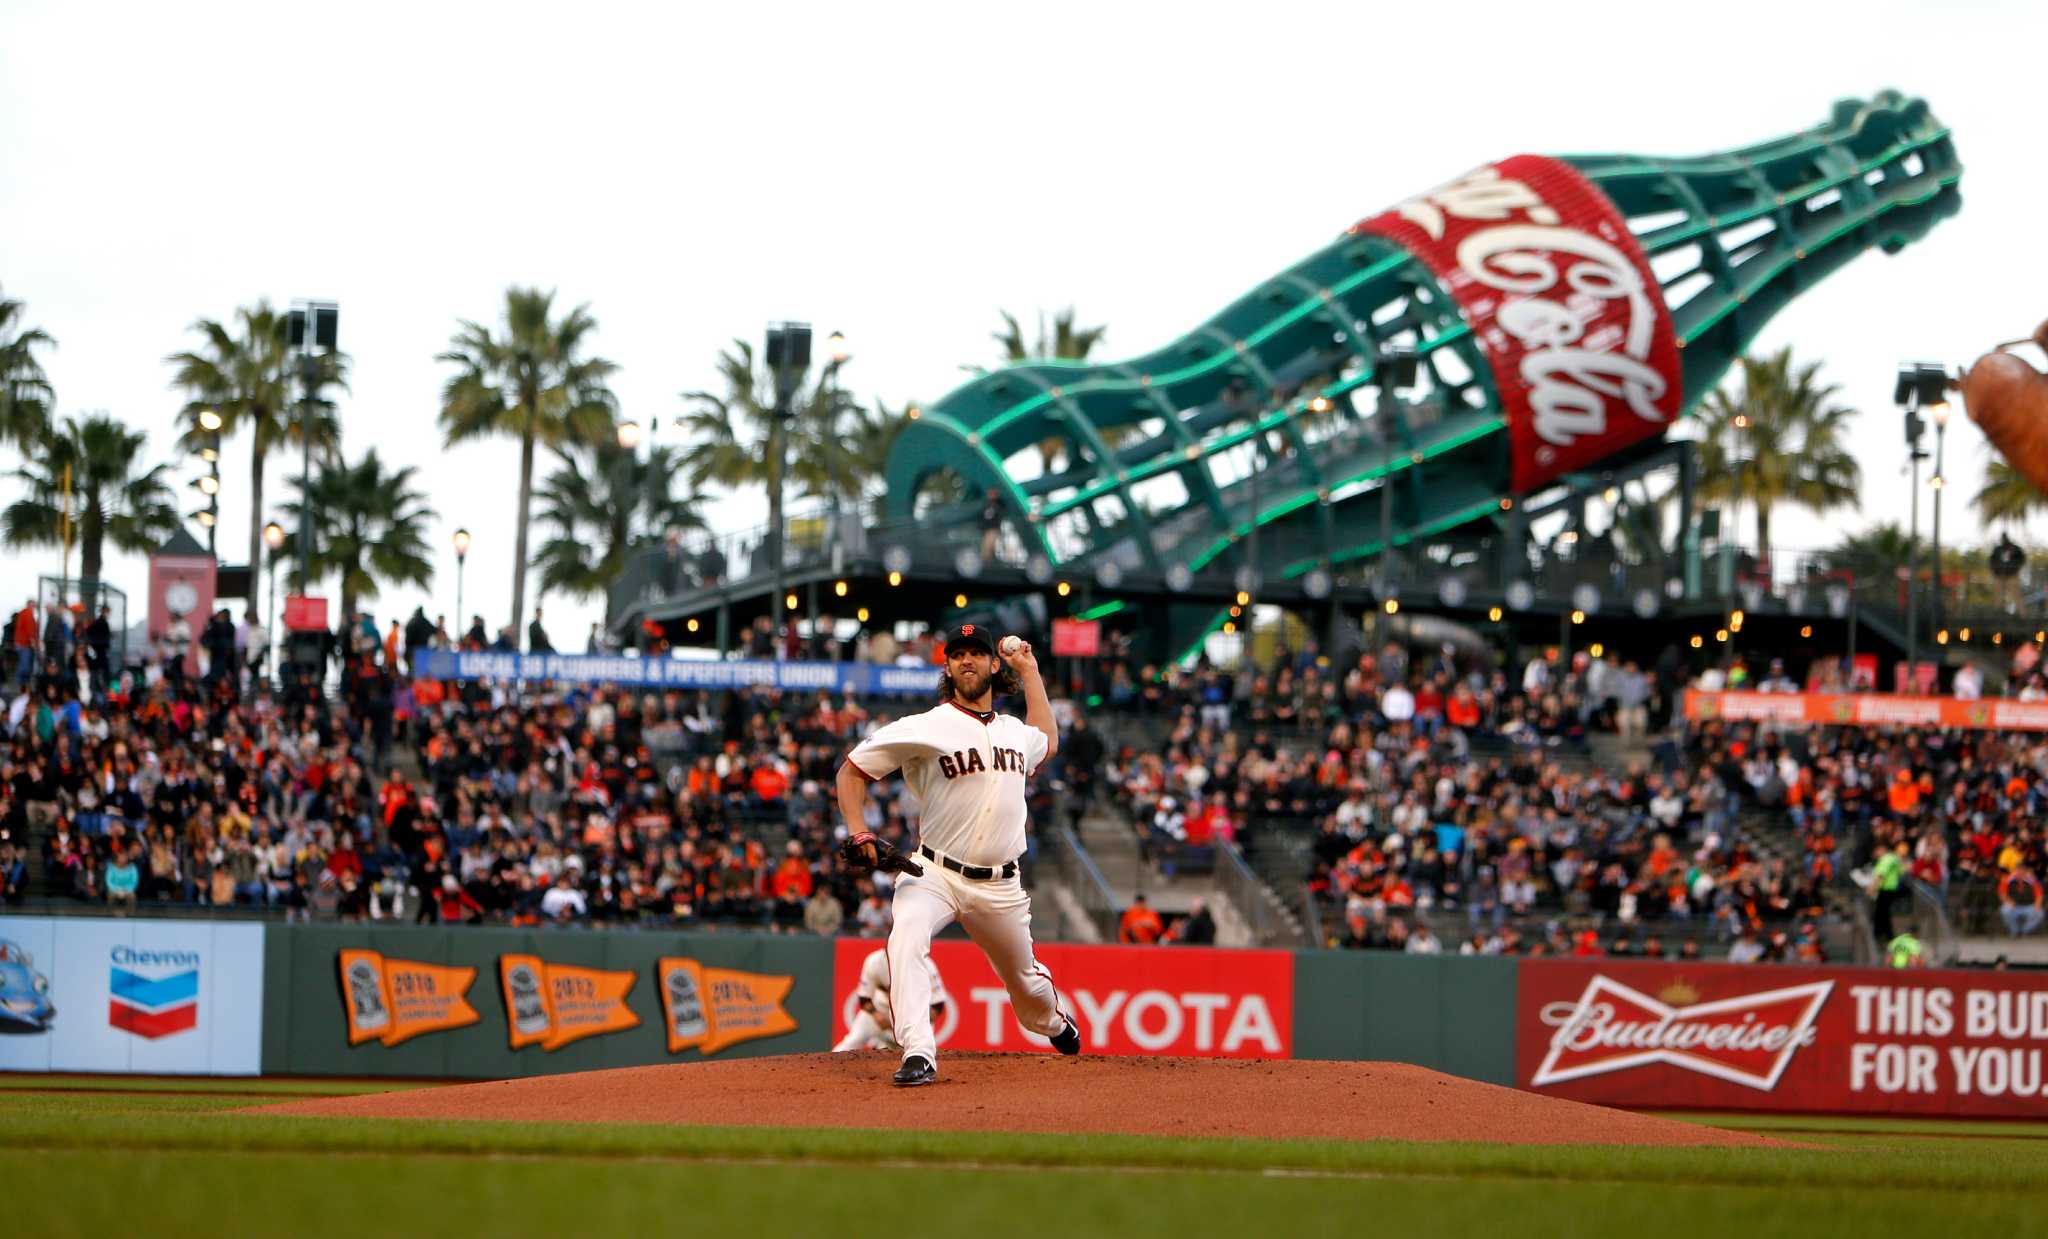 San Francisco Giants Memorial Day Auction: Tim Flannery Game-Used